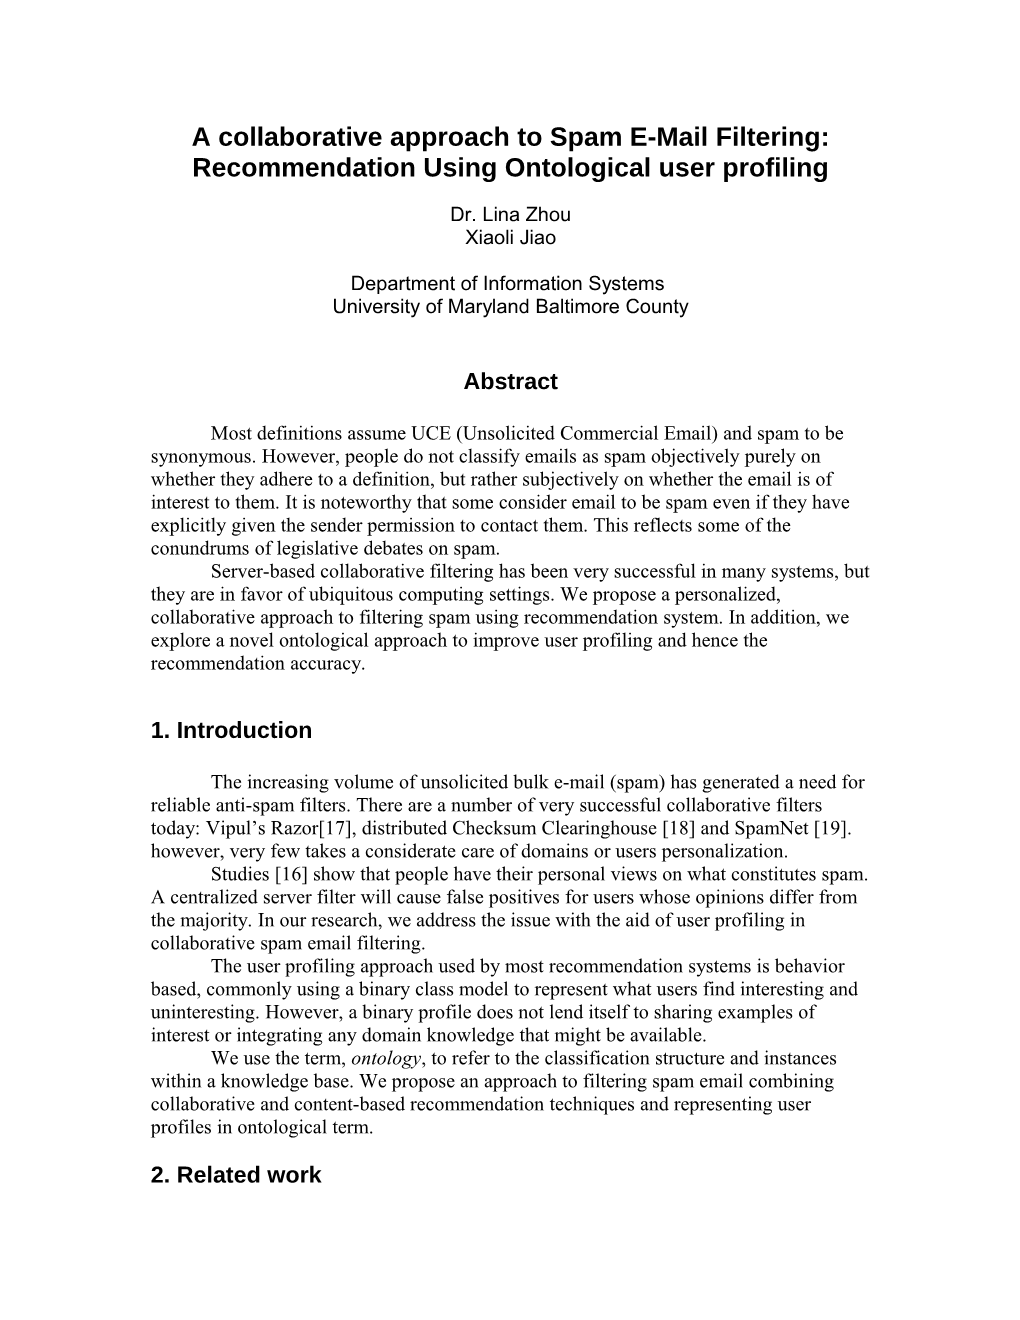 A Collaborative Approach to Spam E-Mail Filtering: Recommendation Using Ontological User